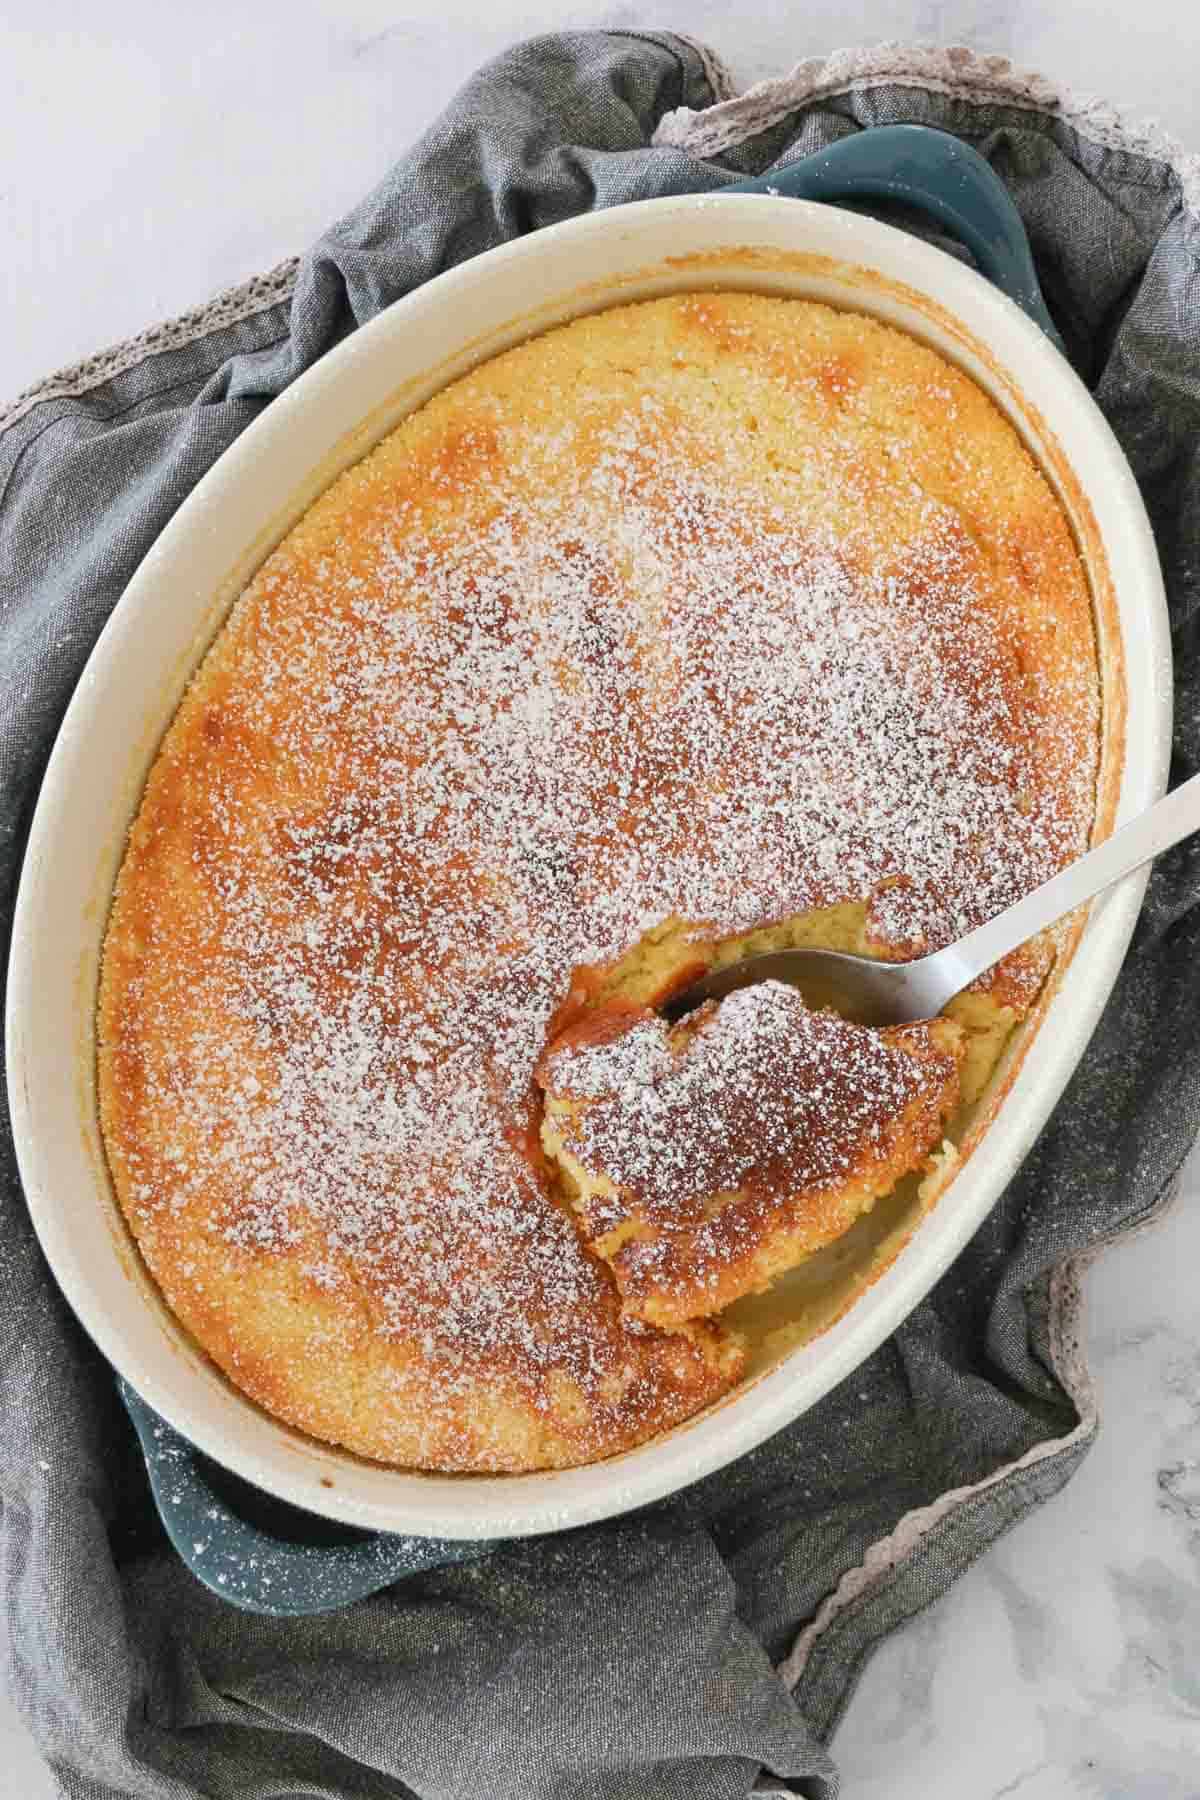 A serving spoon scooping lemon delicious pudding from an oval baking dish.